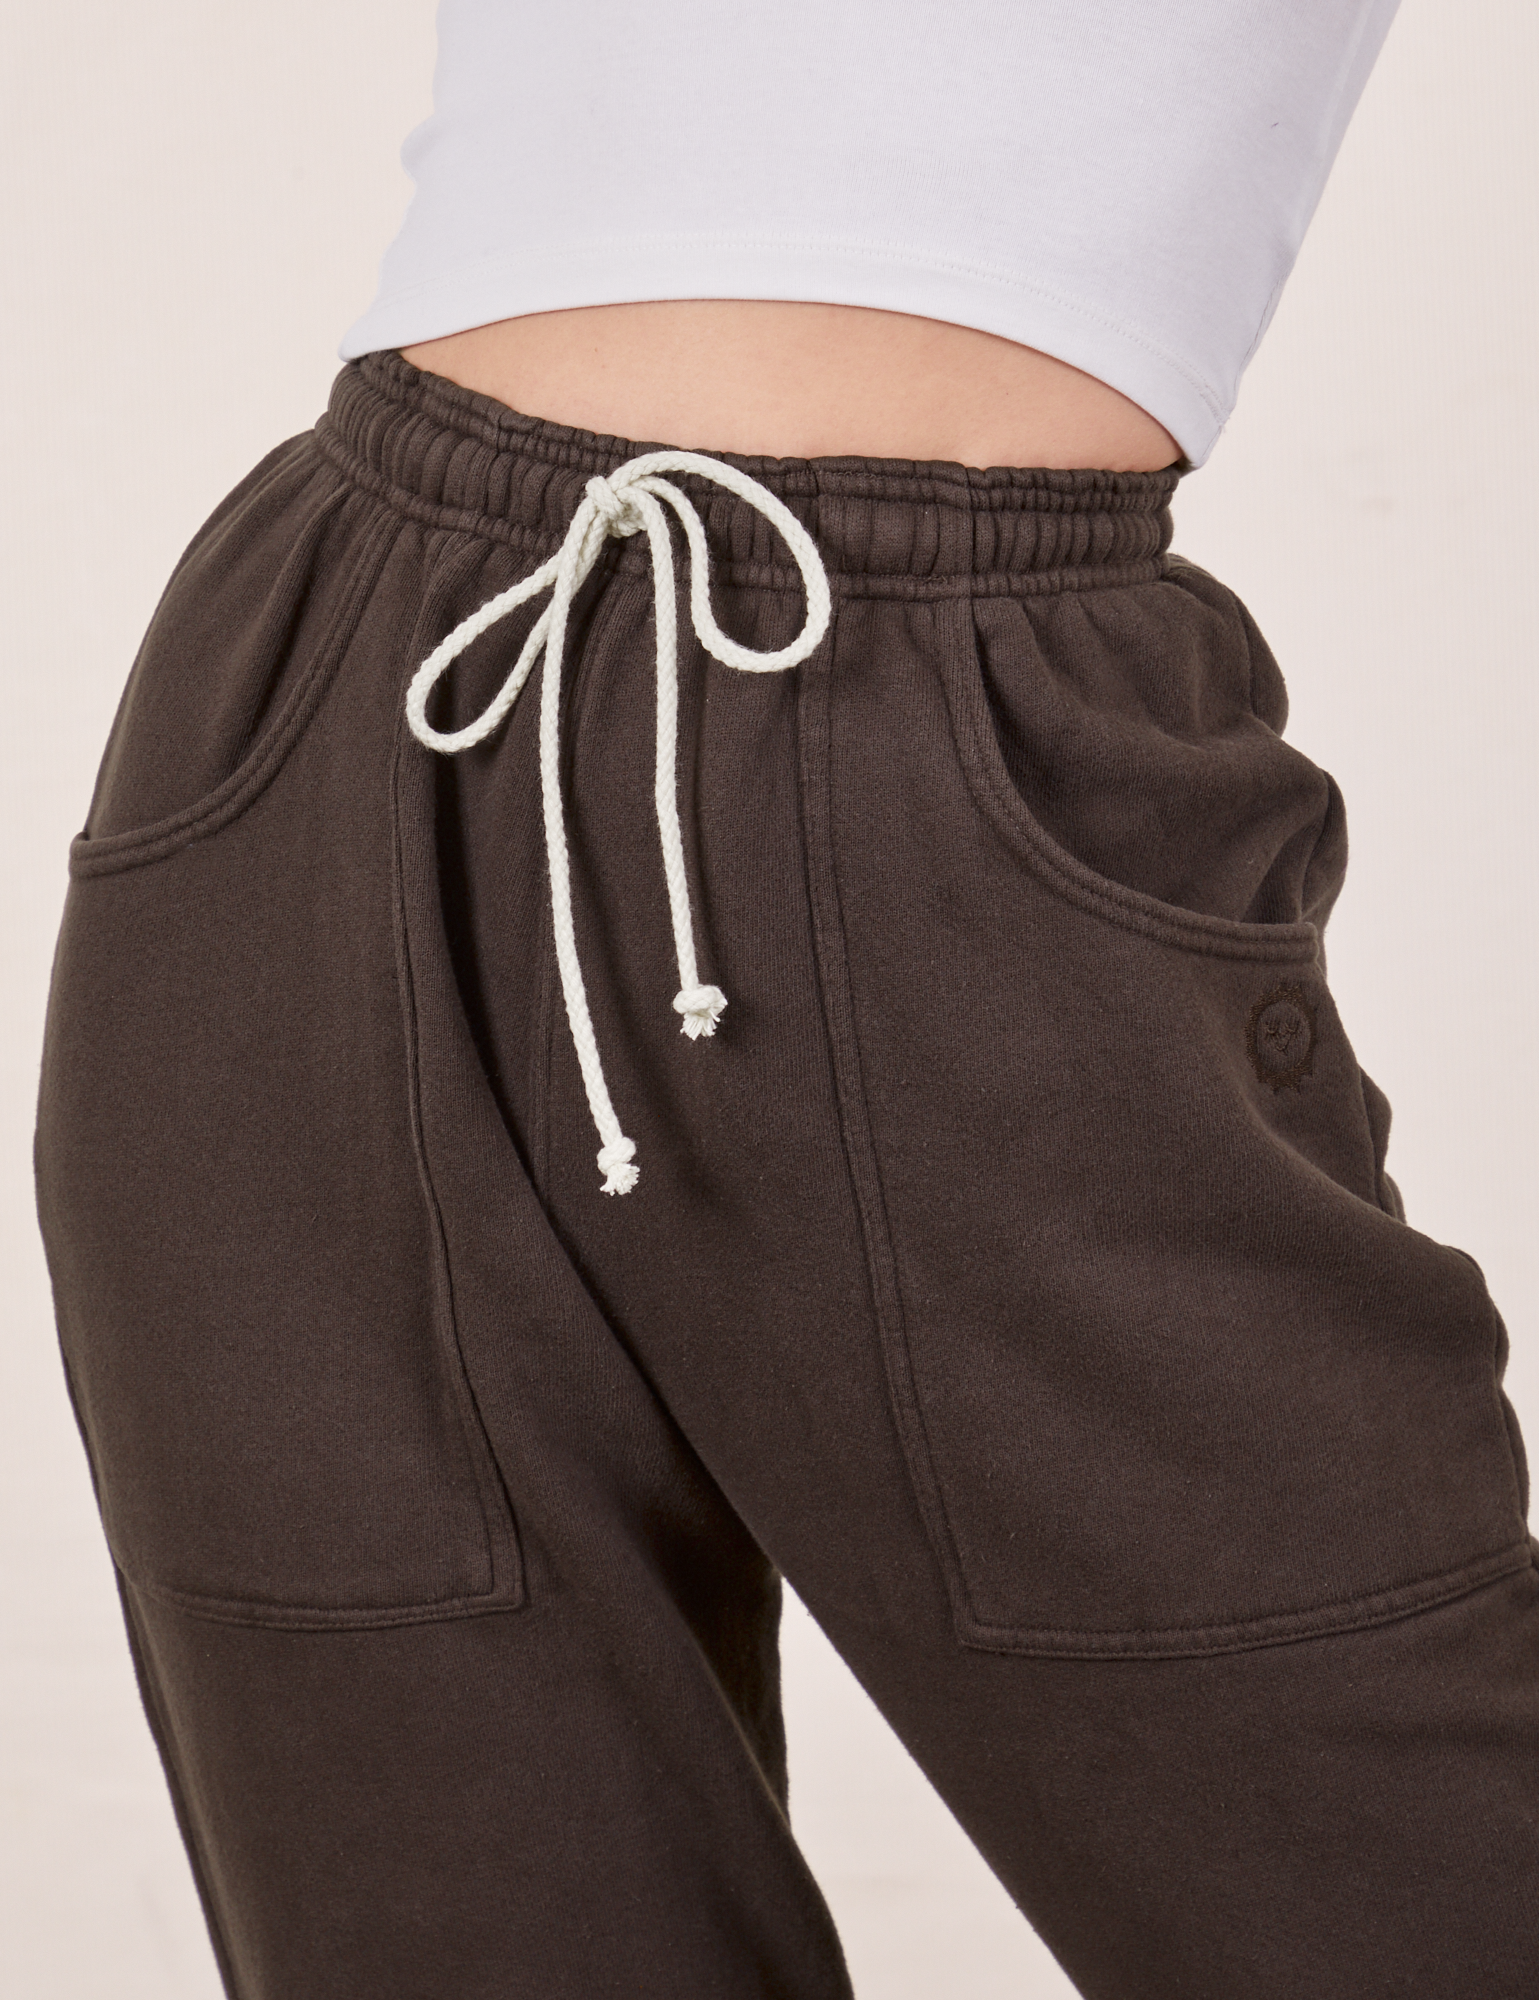 Cropped Rolled Cuff Sweatpants in Espresso Brown front close up on Alex